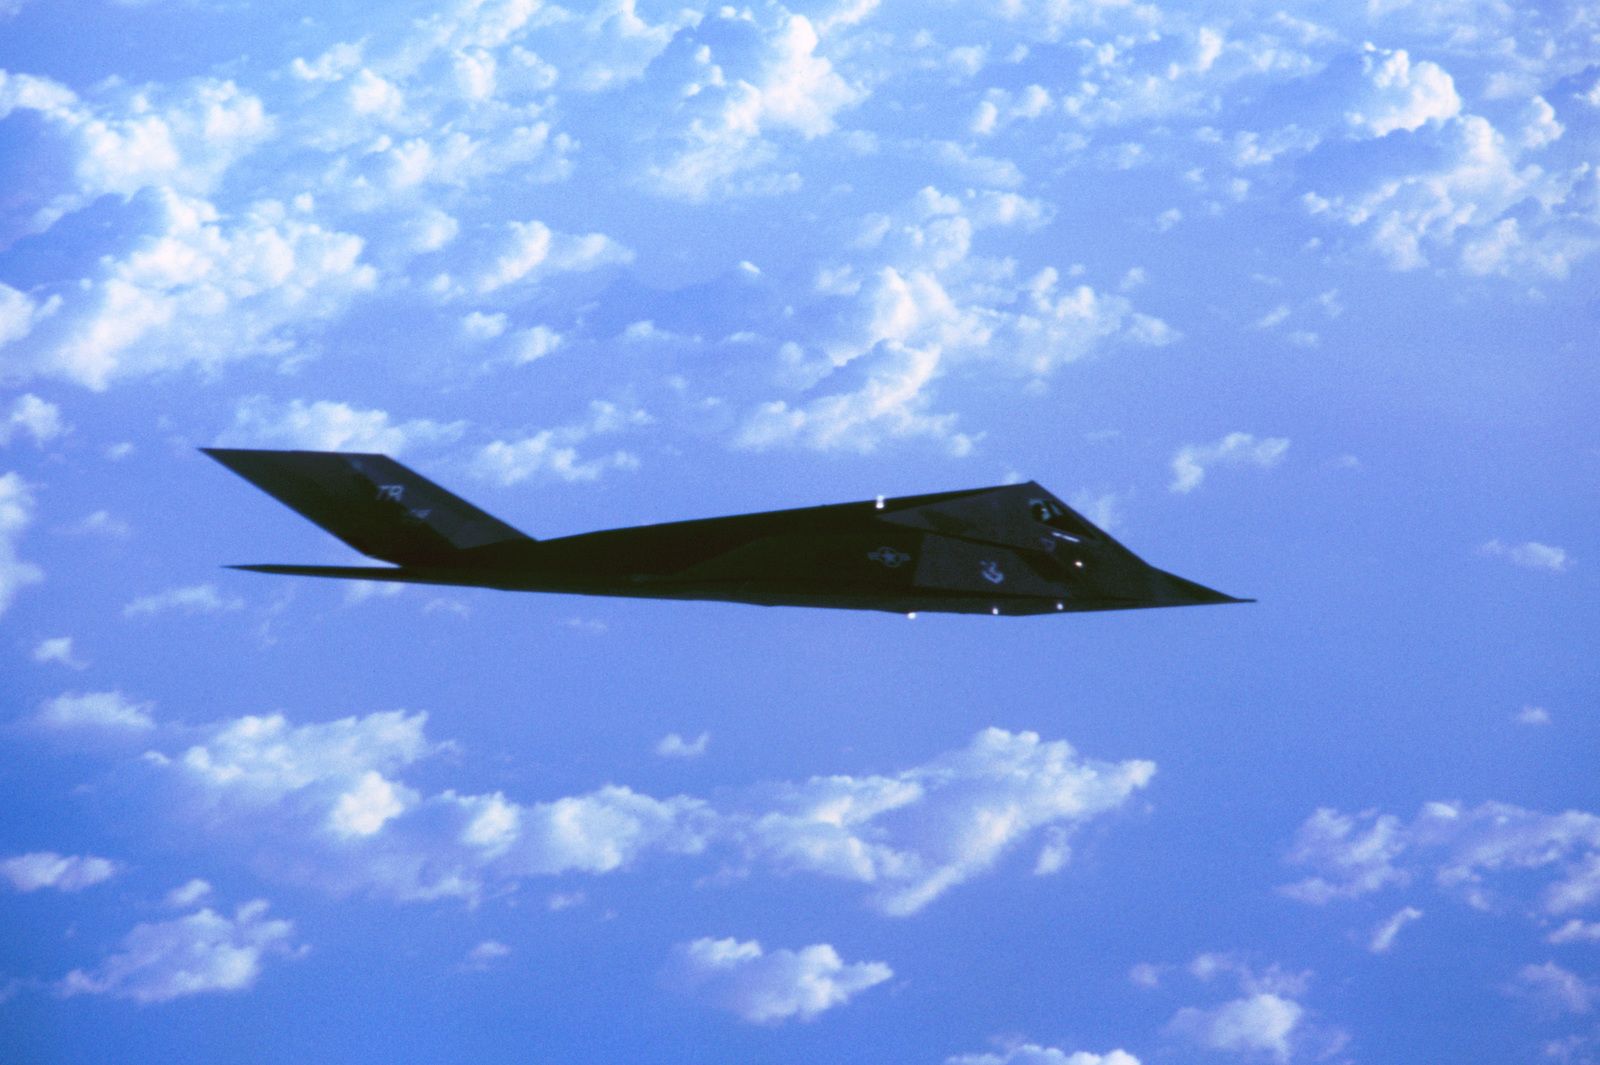 air-to-air-side-view-of-a-f-117-nighthawk-stealth-fighter-during-a-training-889f76-1600